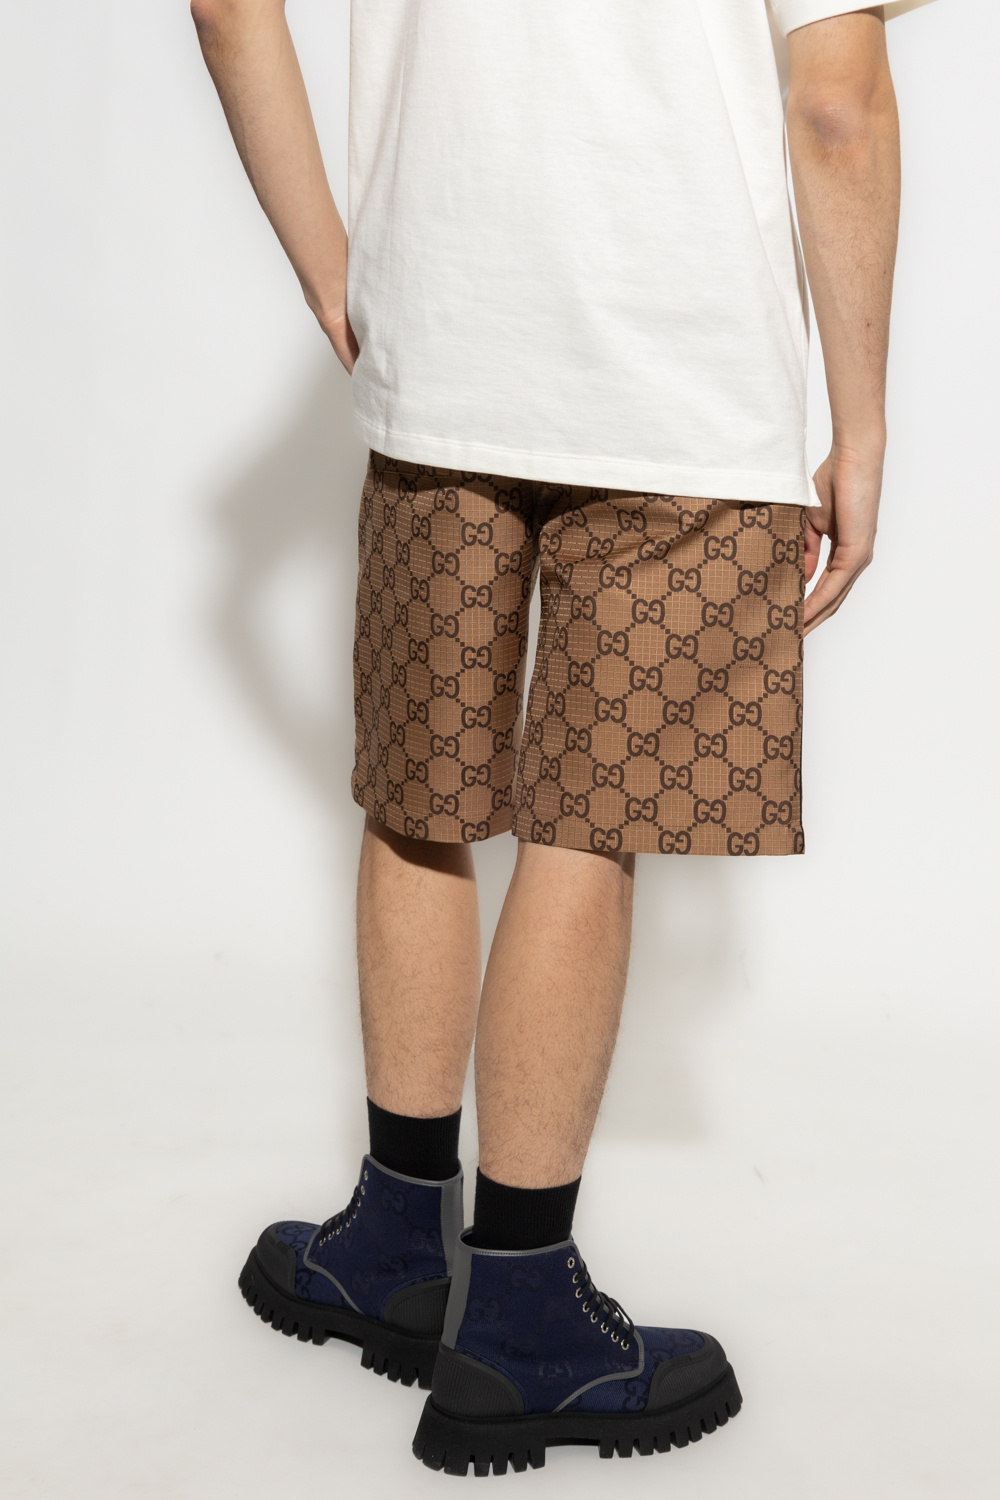 Gucci Shorts with monogram